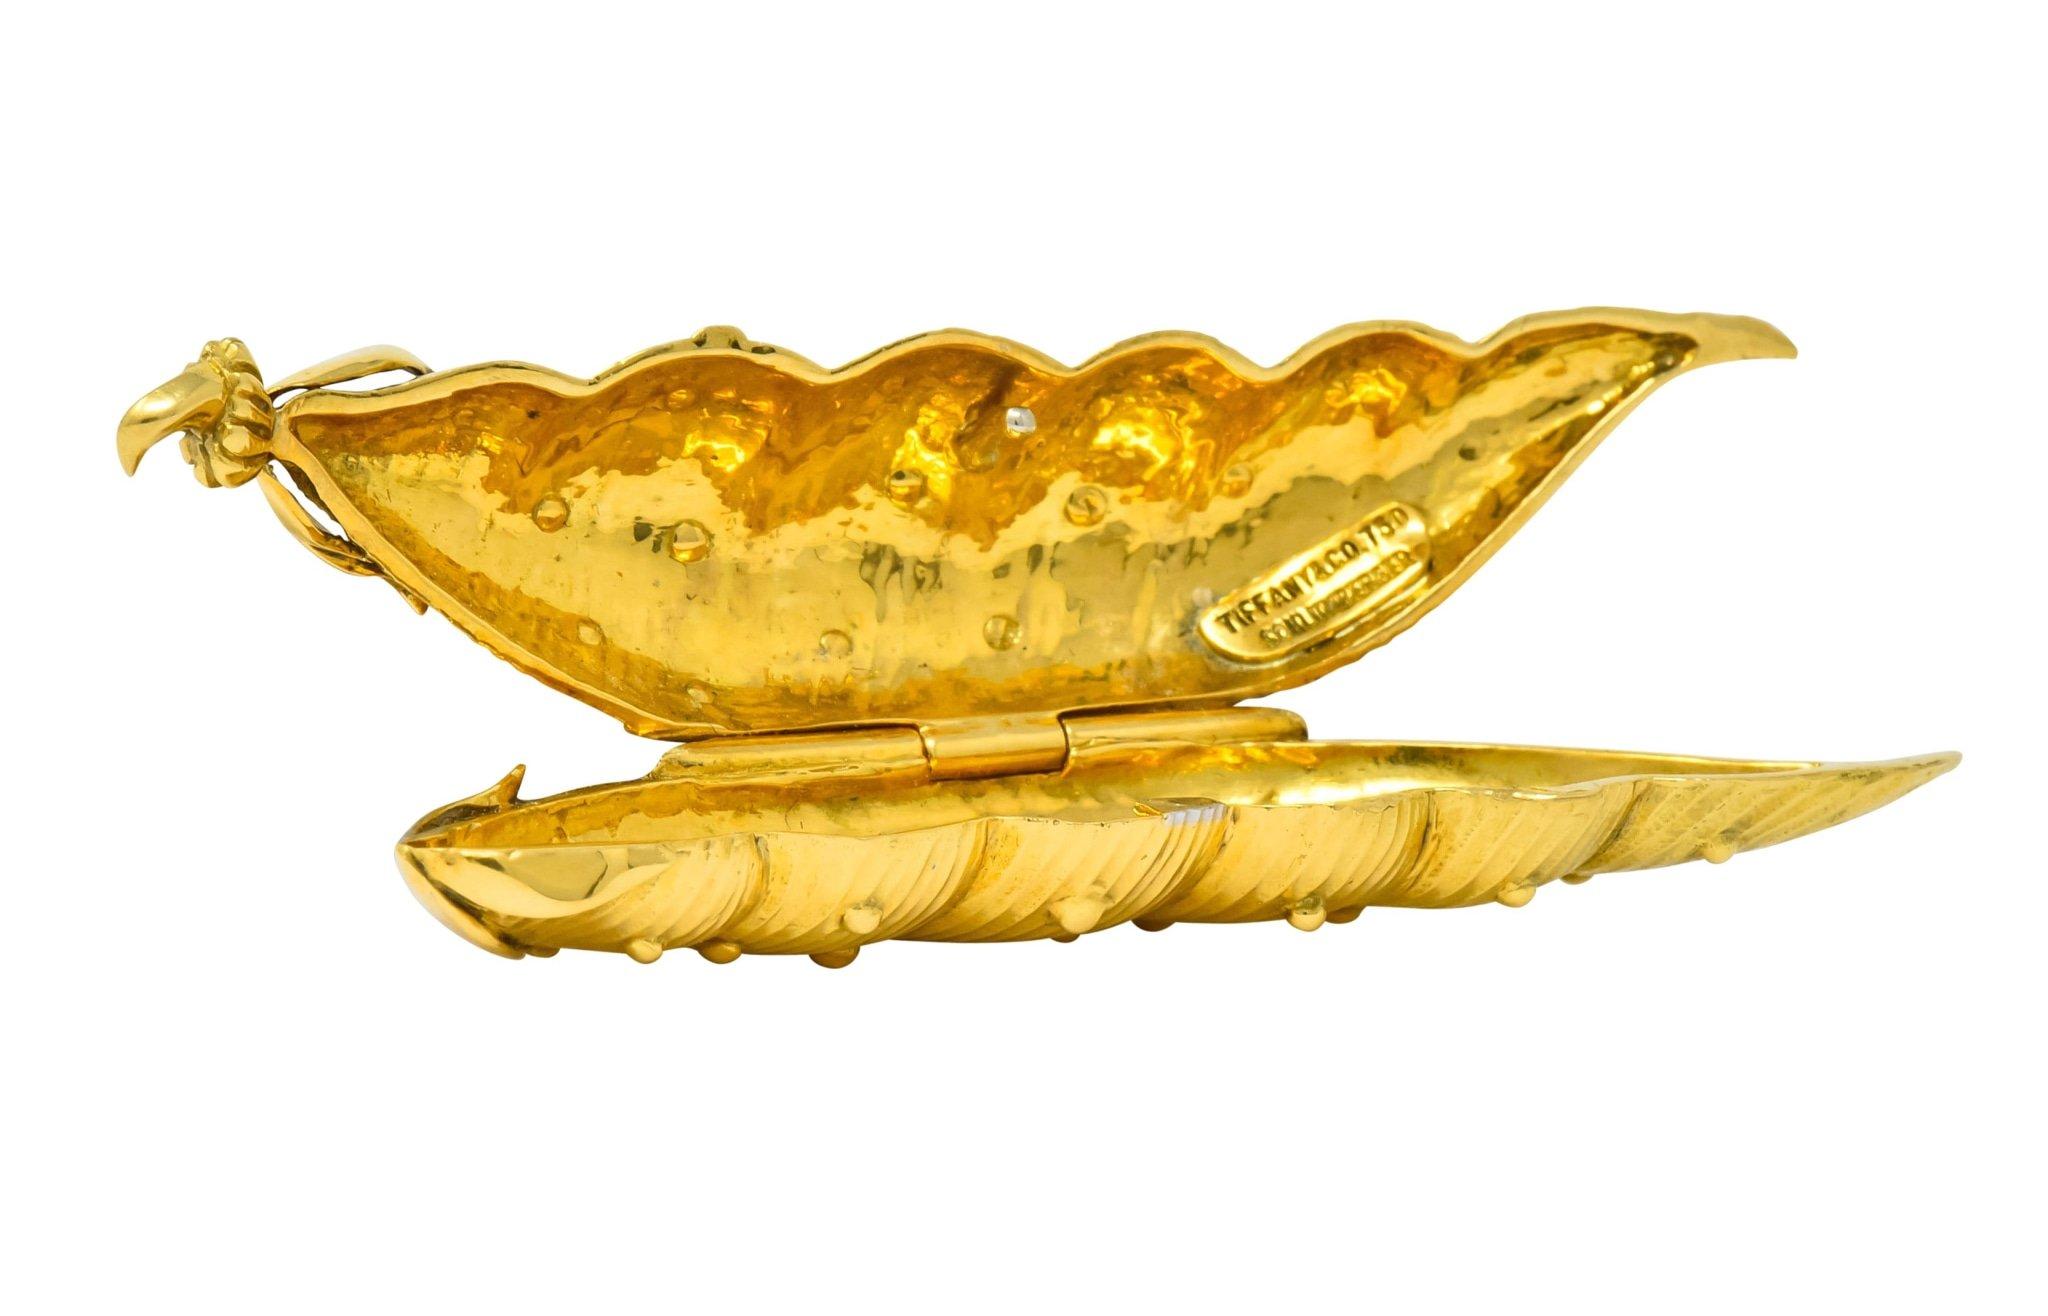 Designed as pea pod shaped repousse pill box with ribbed texture and raised gold bead detail throughout

Topped by decorative foliate stem

Opens on a hinge to reveal a polished gold inside

Signed Schlumberger Tiffany and stamped 750 for 18 karat